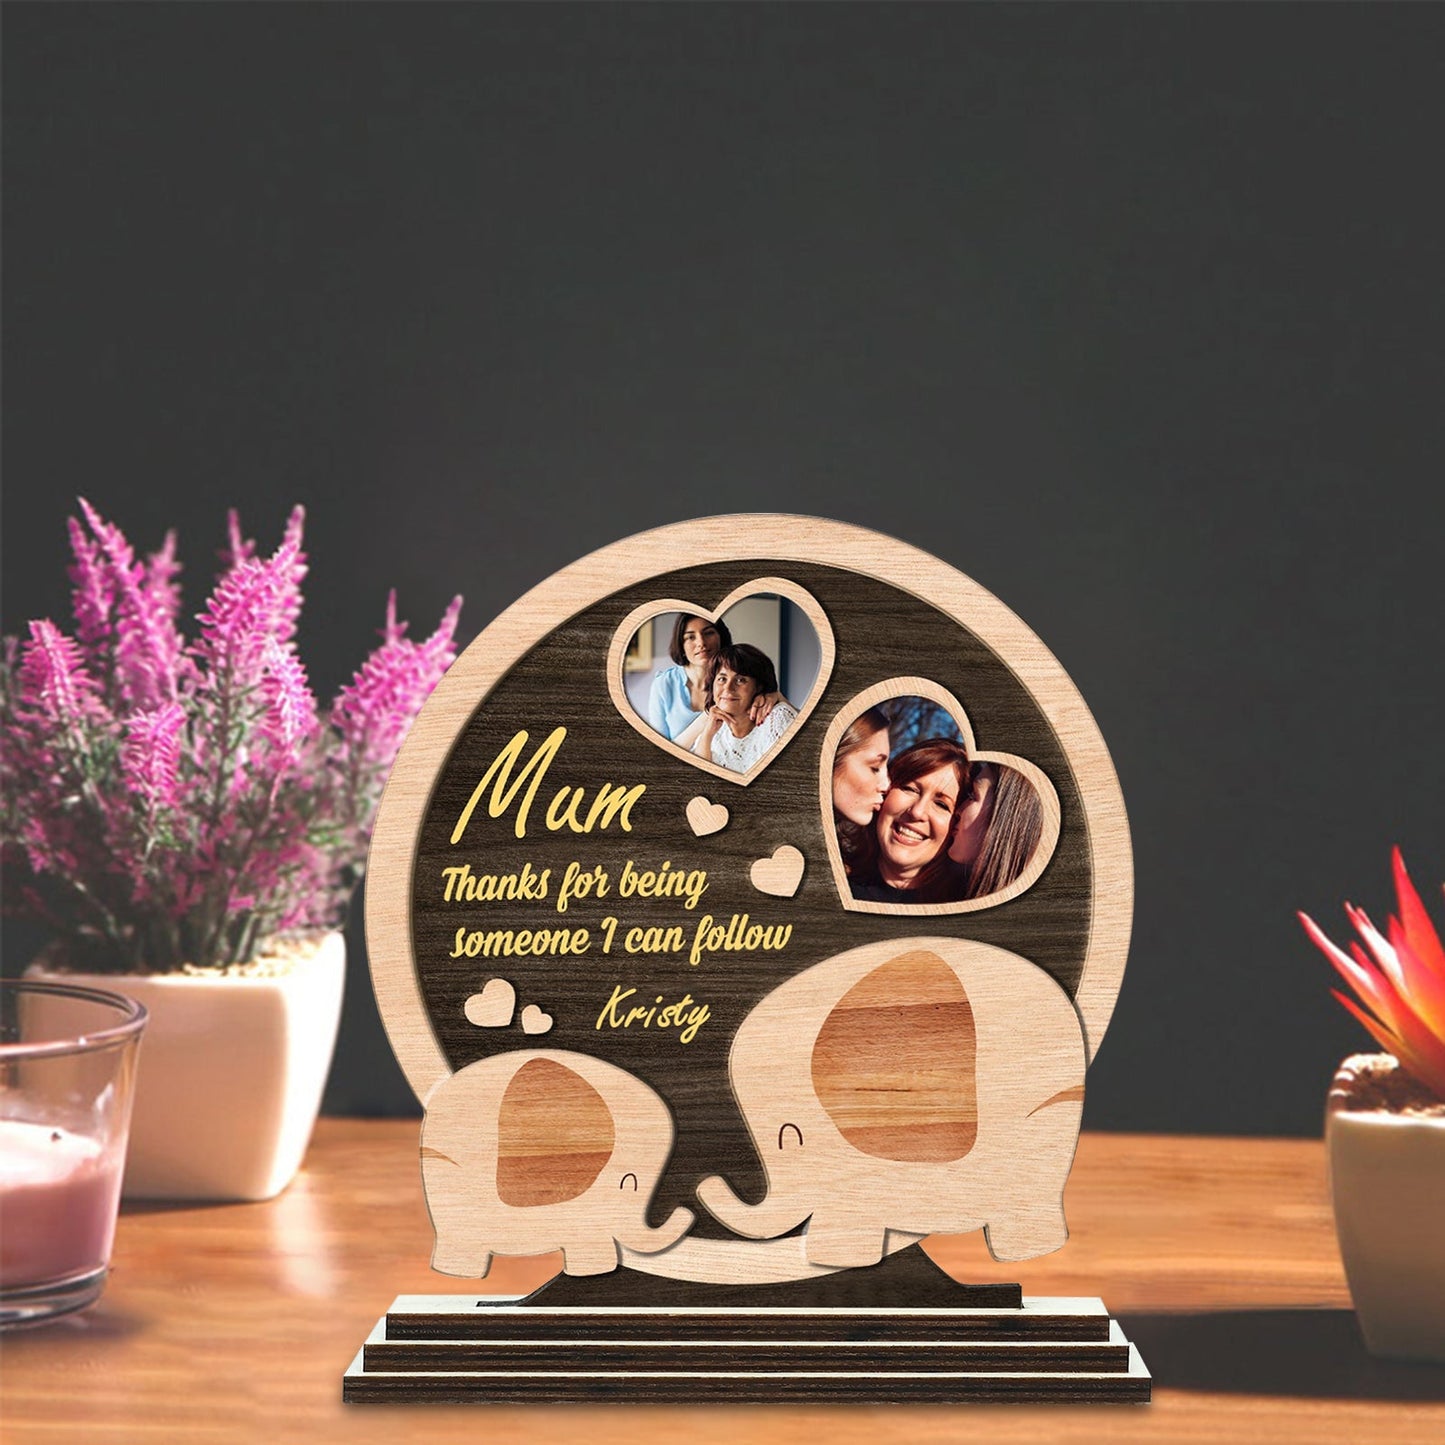 Wooden Custom Photo Ornament with Mother and Child Elephant DesignedbySiti